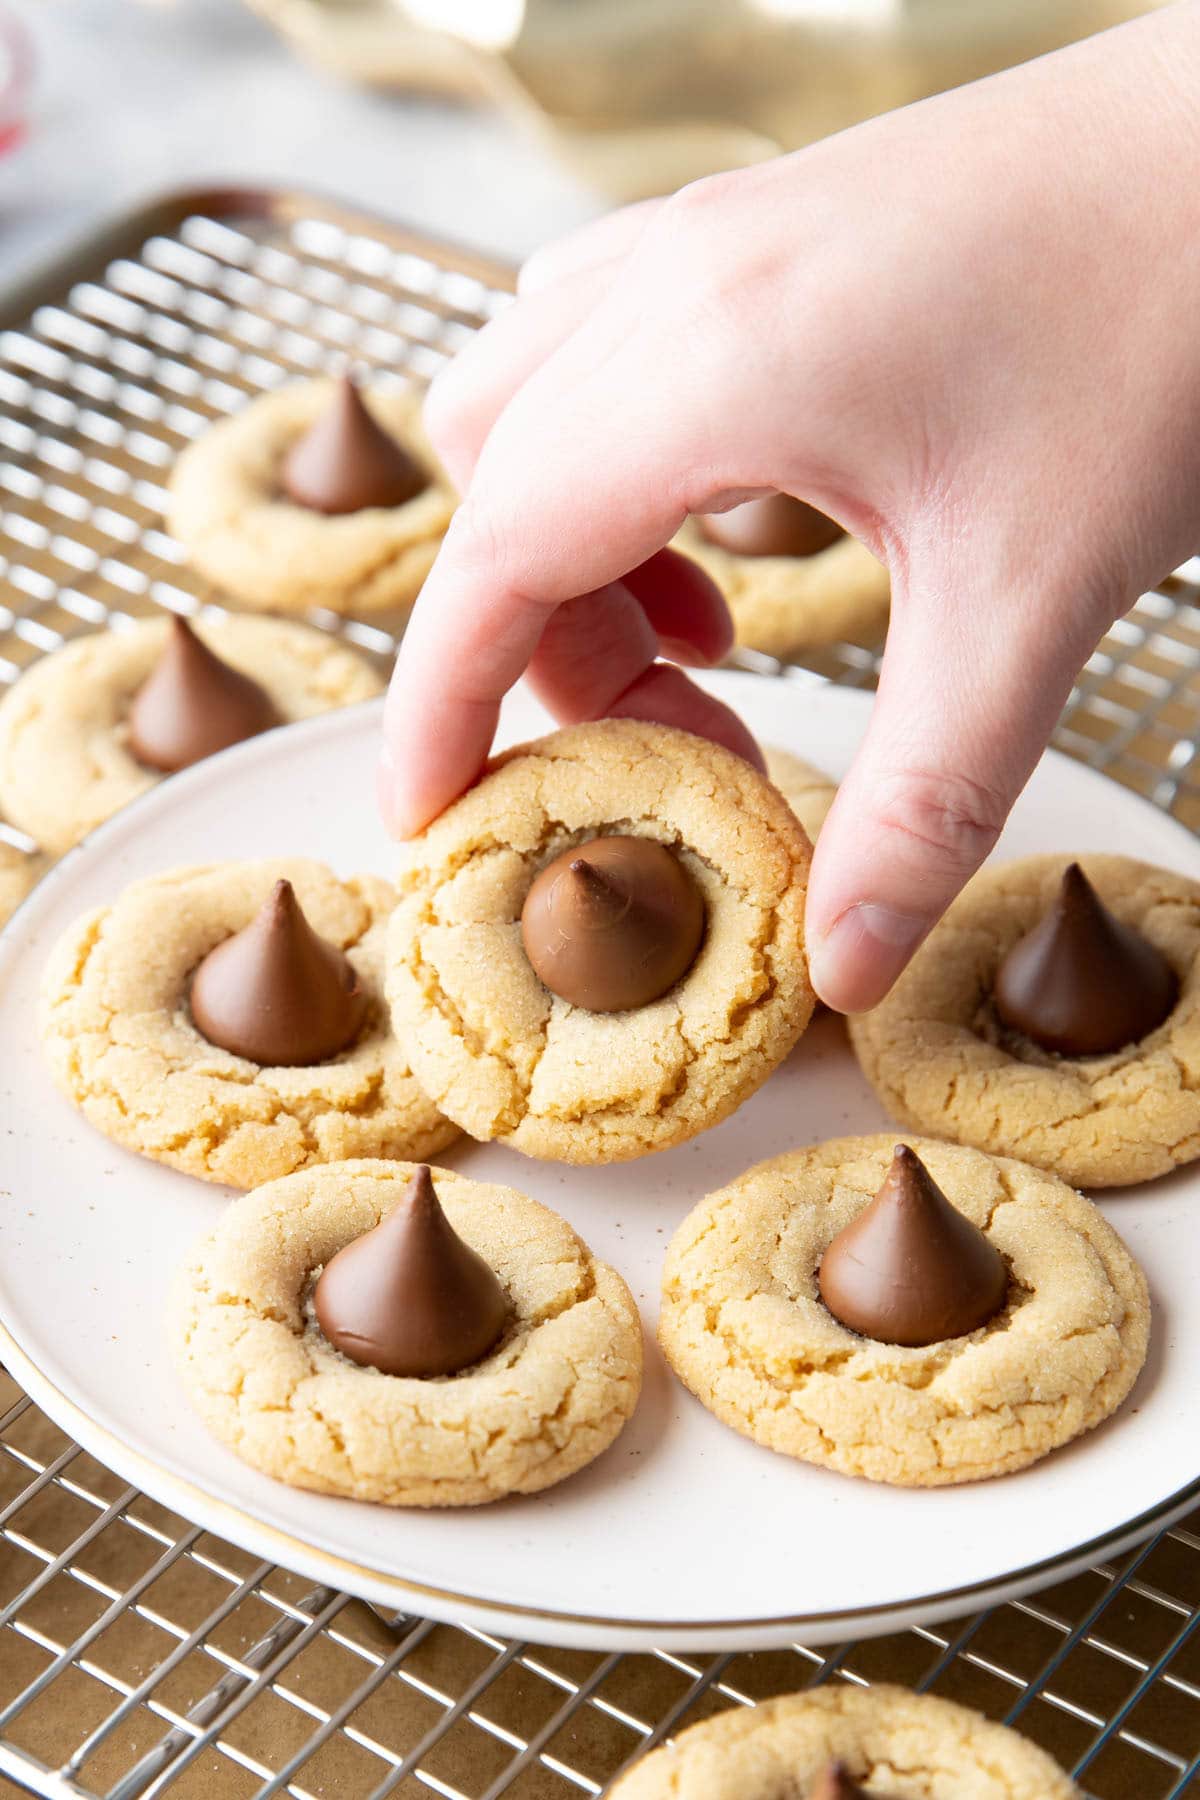 Hand picking up a peanut butter blossom cookie from a plate